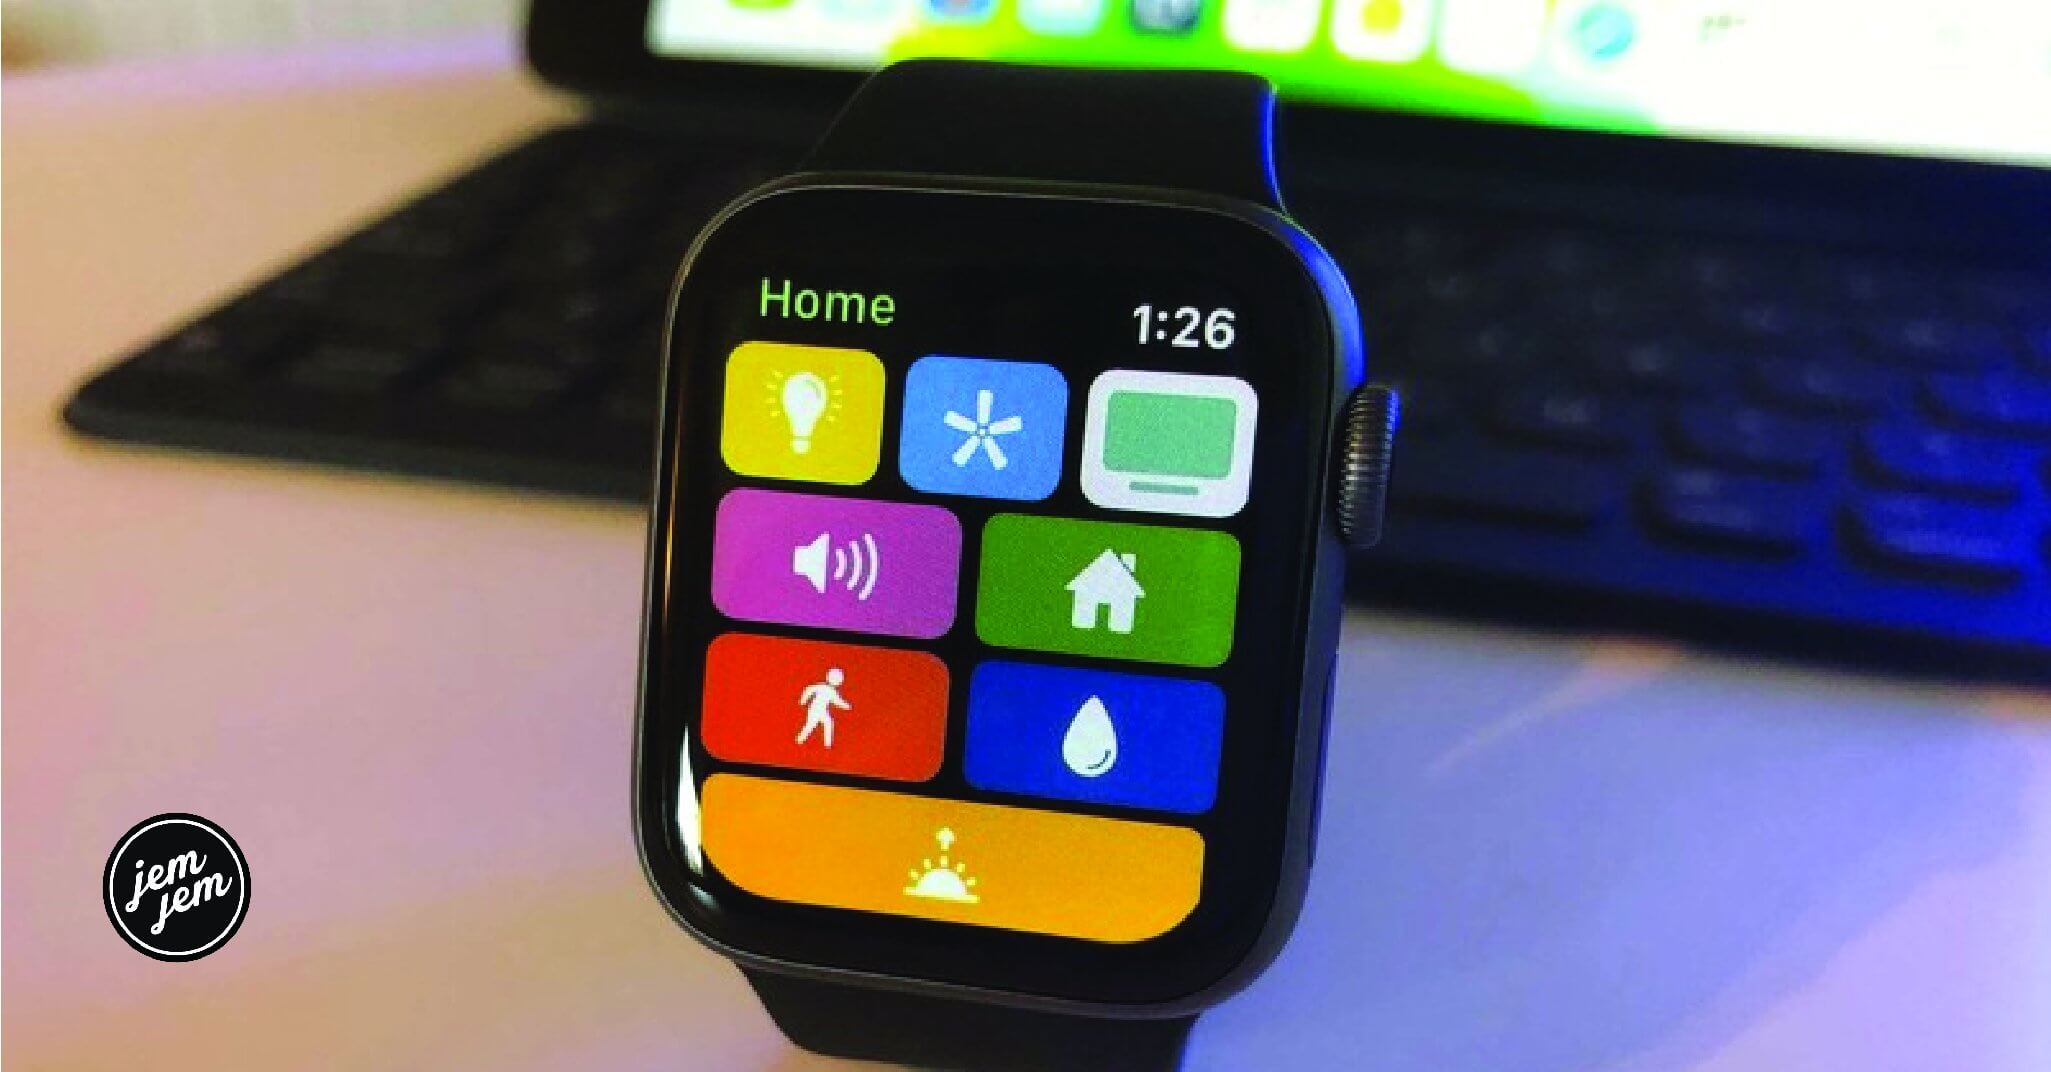 How to use the Home app on Apple Watch